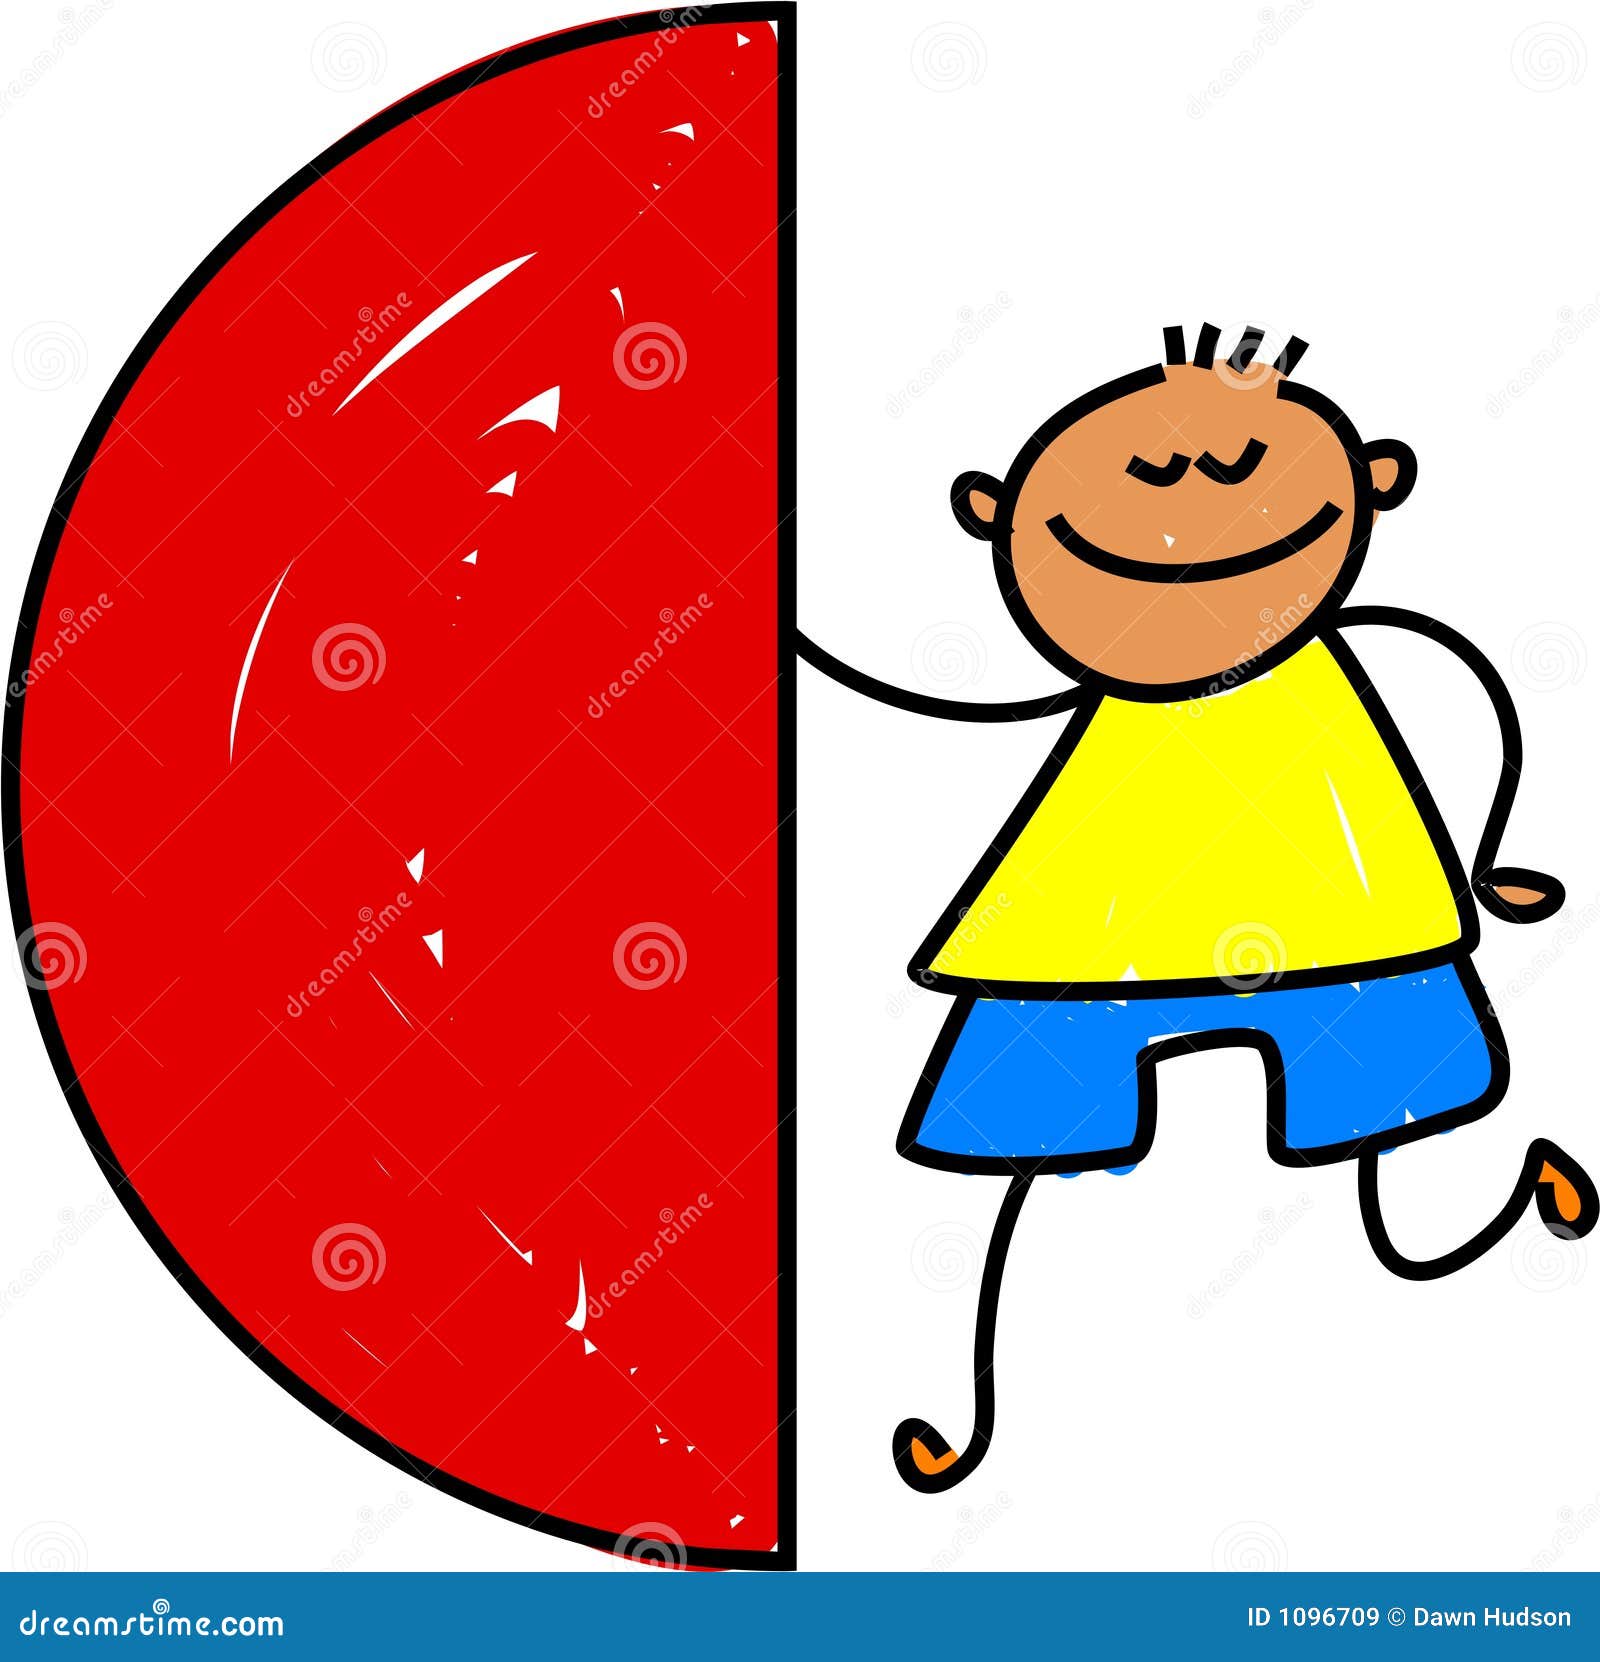 clipart circle objects - photo #19